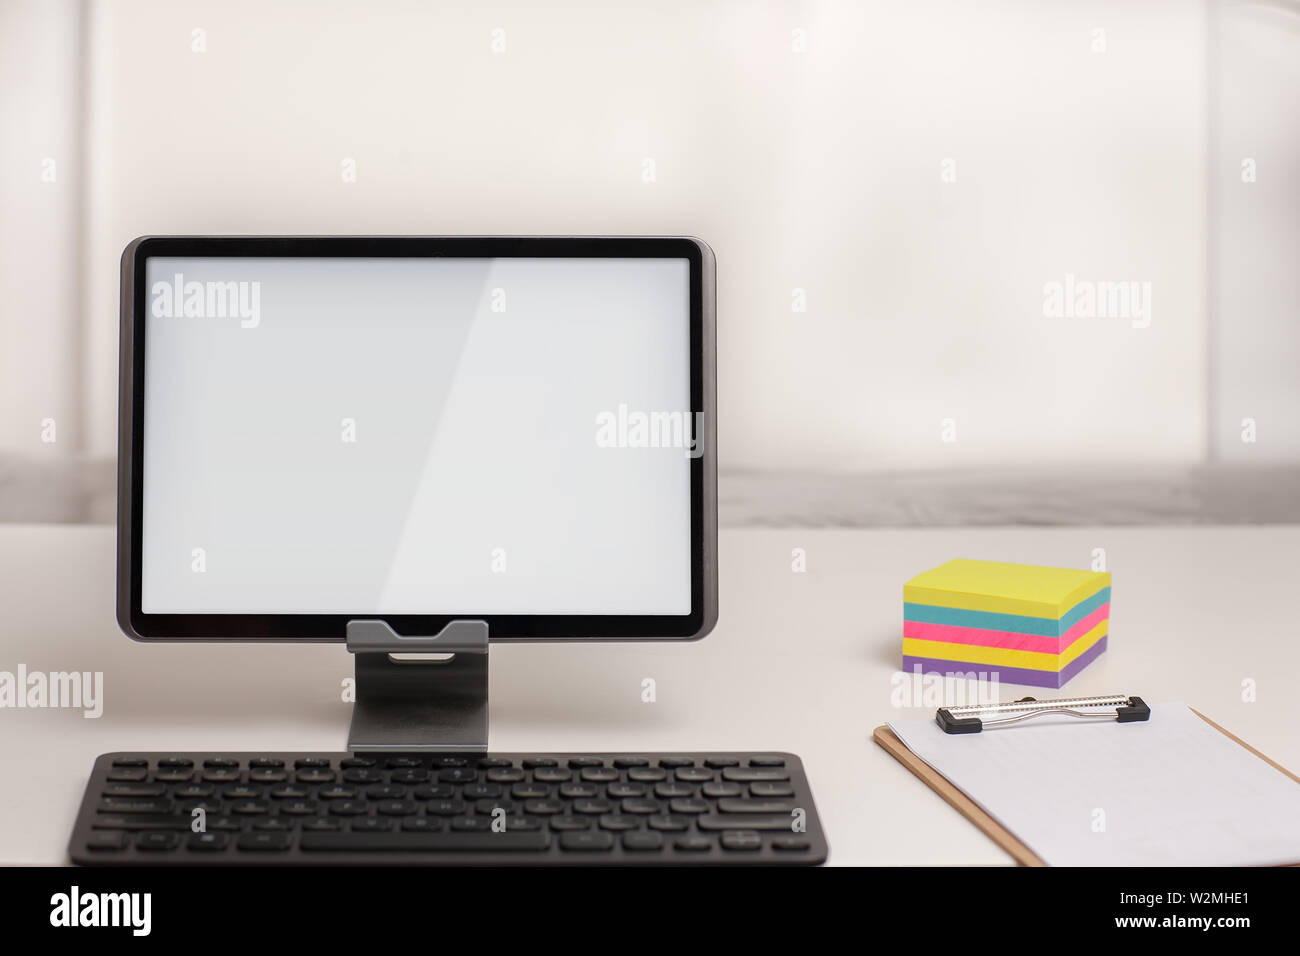 A tablet with a wireless keyboard, on a white desk with note taking office supplies. Stock Photo